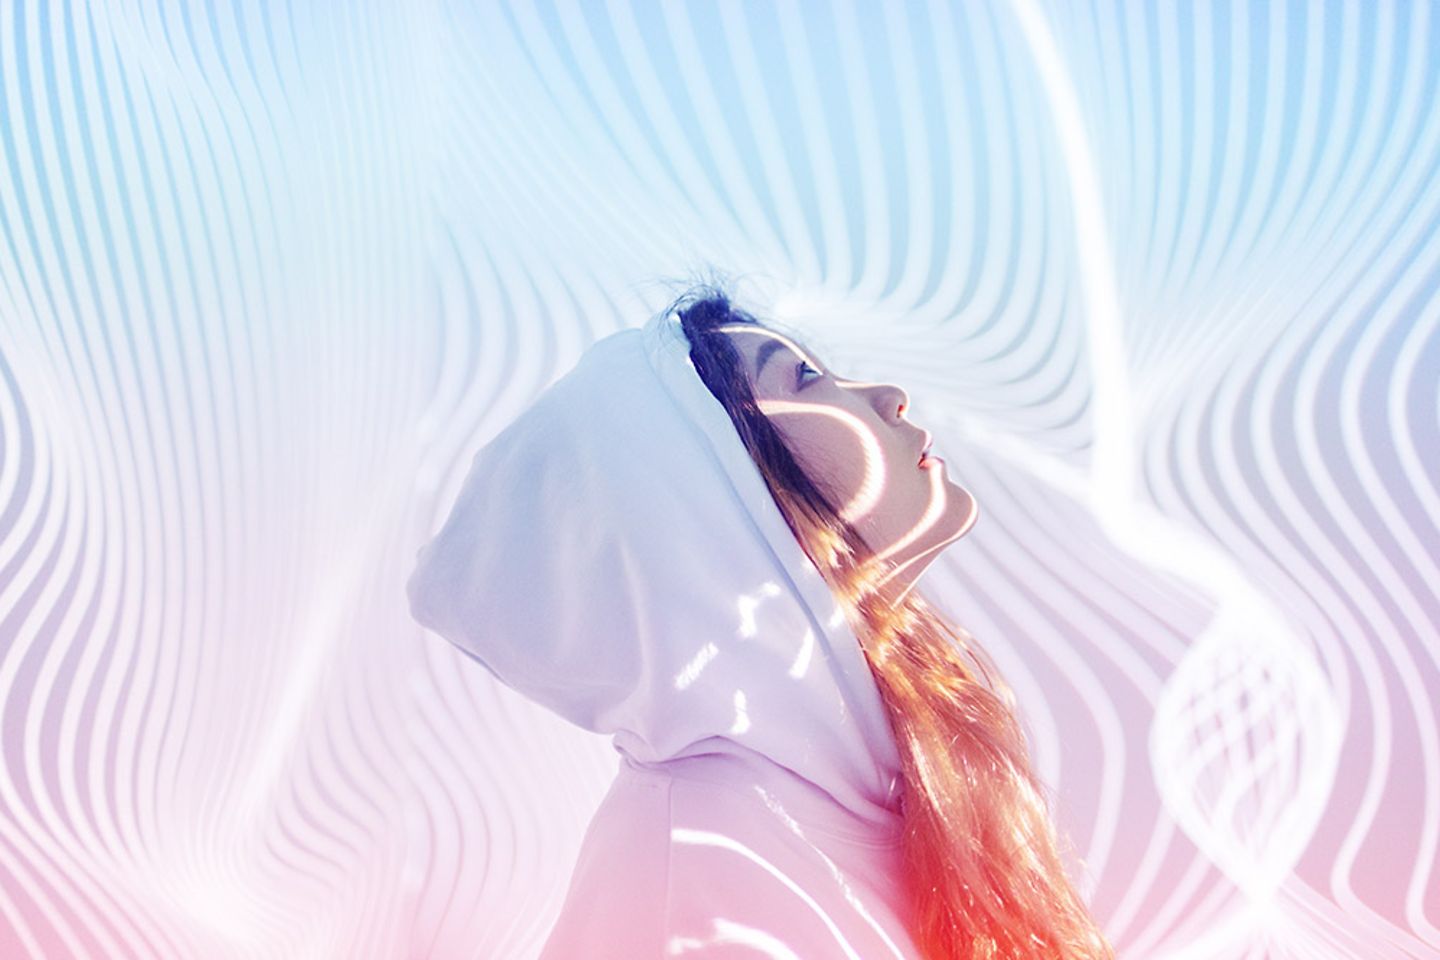 Young woman standing against holographic background